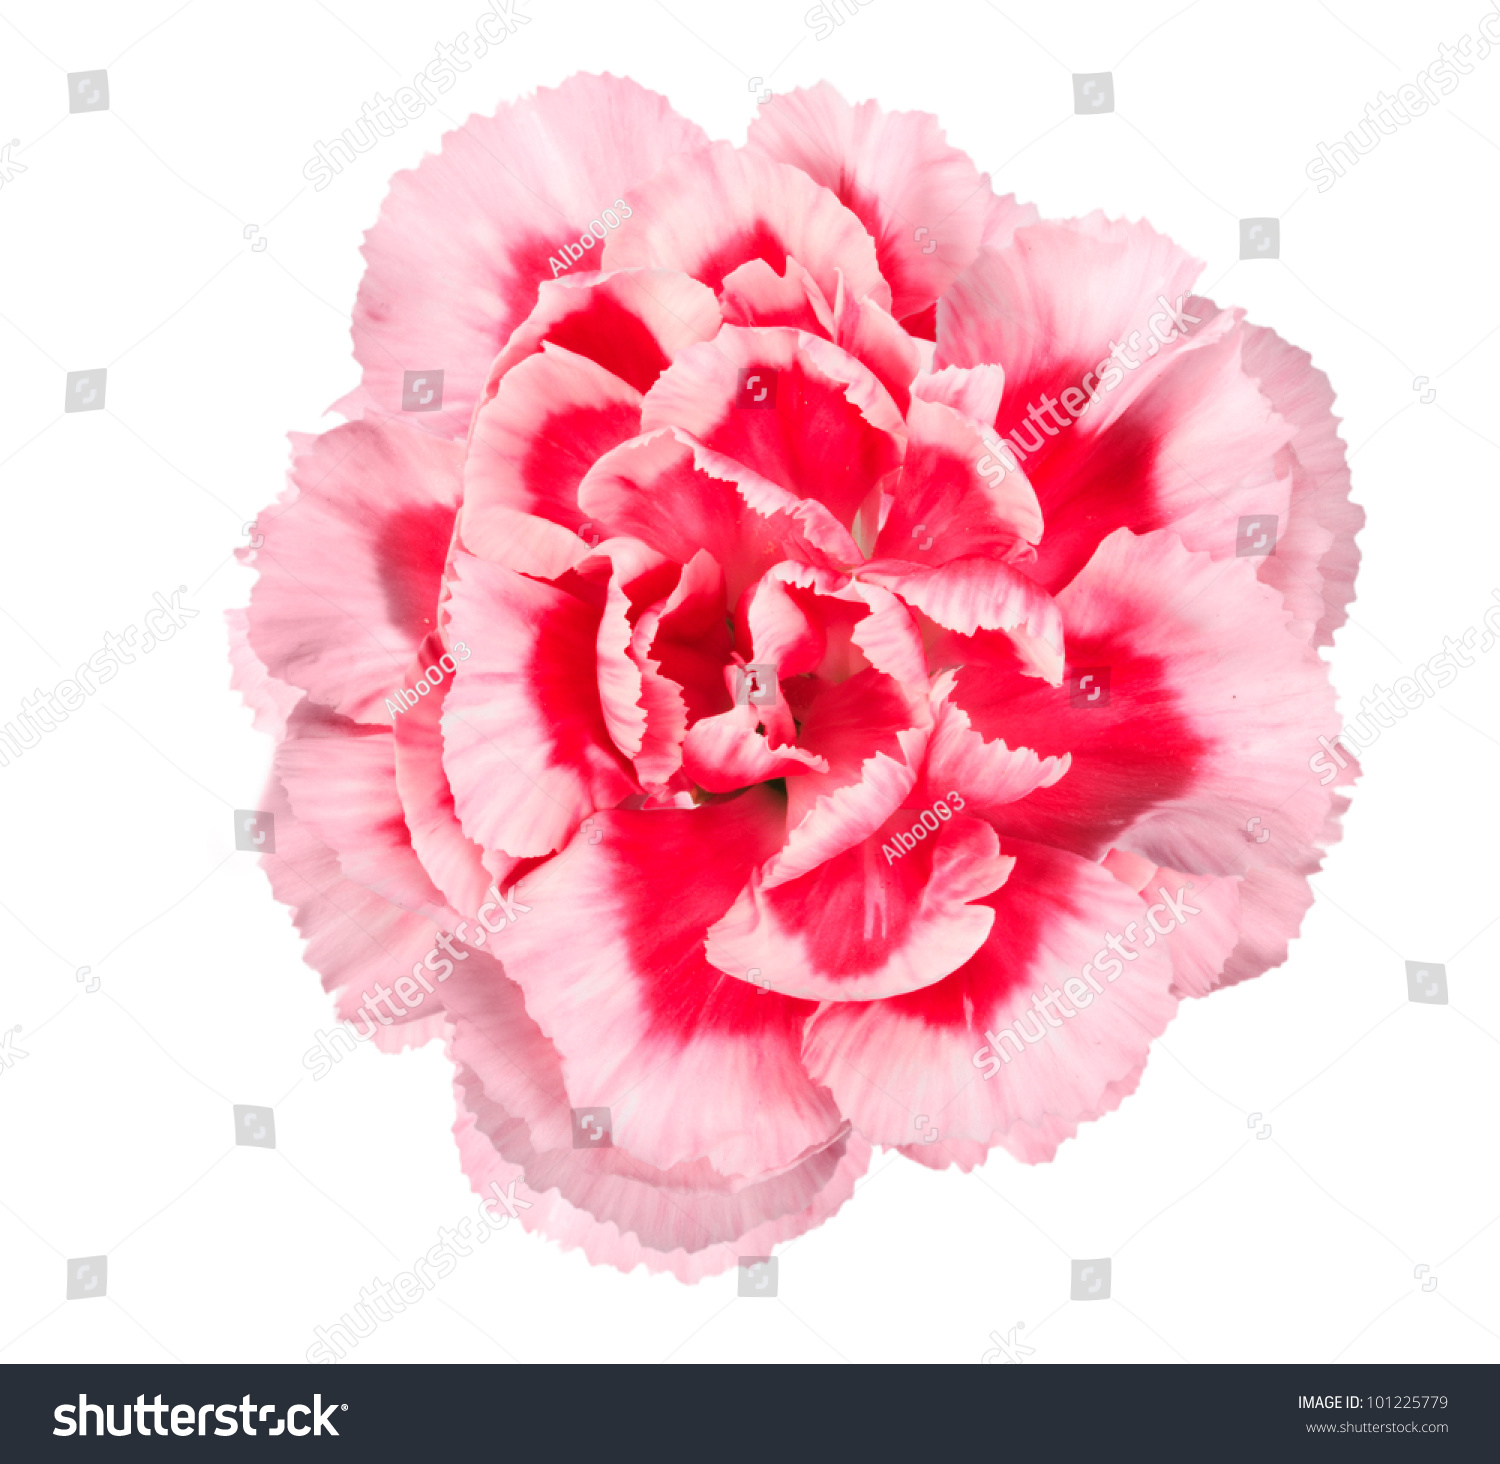 One Pink Flower Carnation Closeup Isolated Stock Photo 101225779 ...